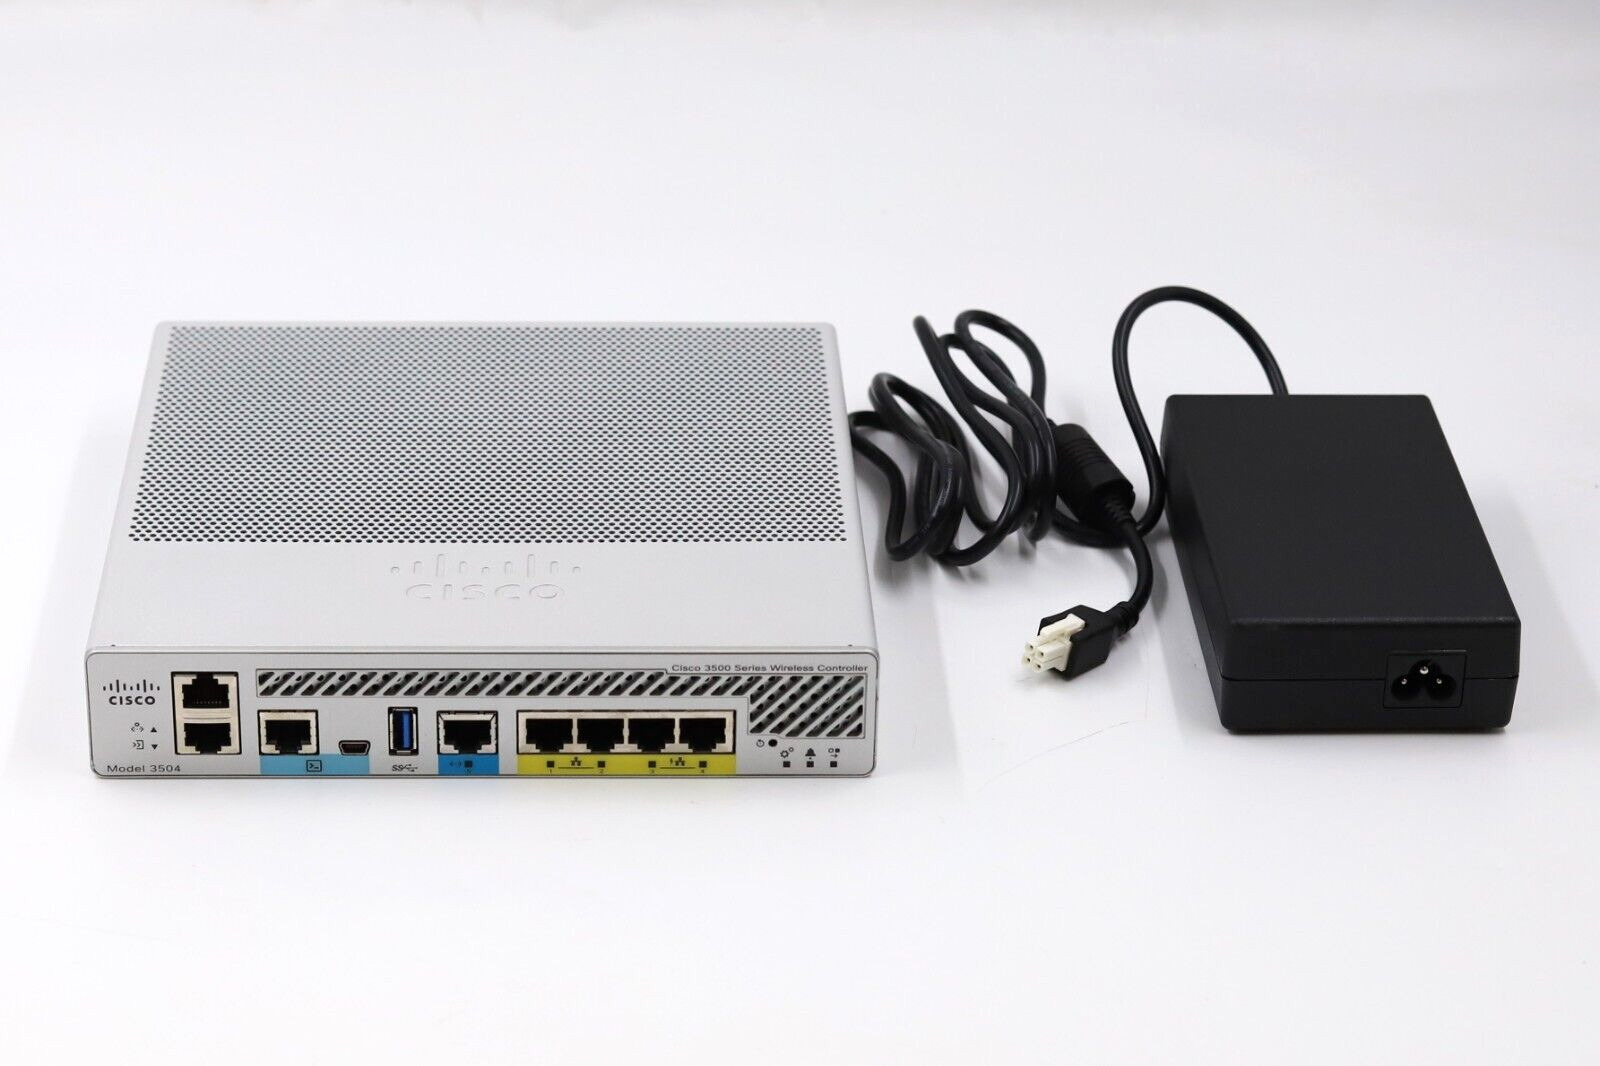 Cisco 3504 4-Port Wireless LAN Controller With Adapter P/N: AIR-CT3504-K9 Tested